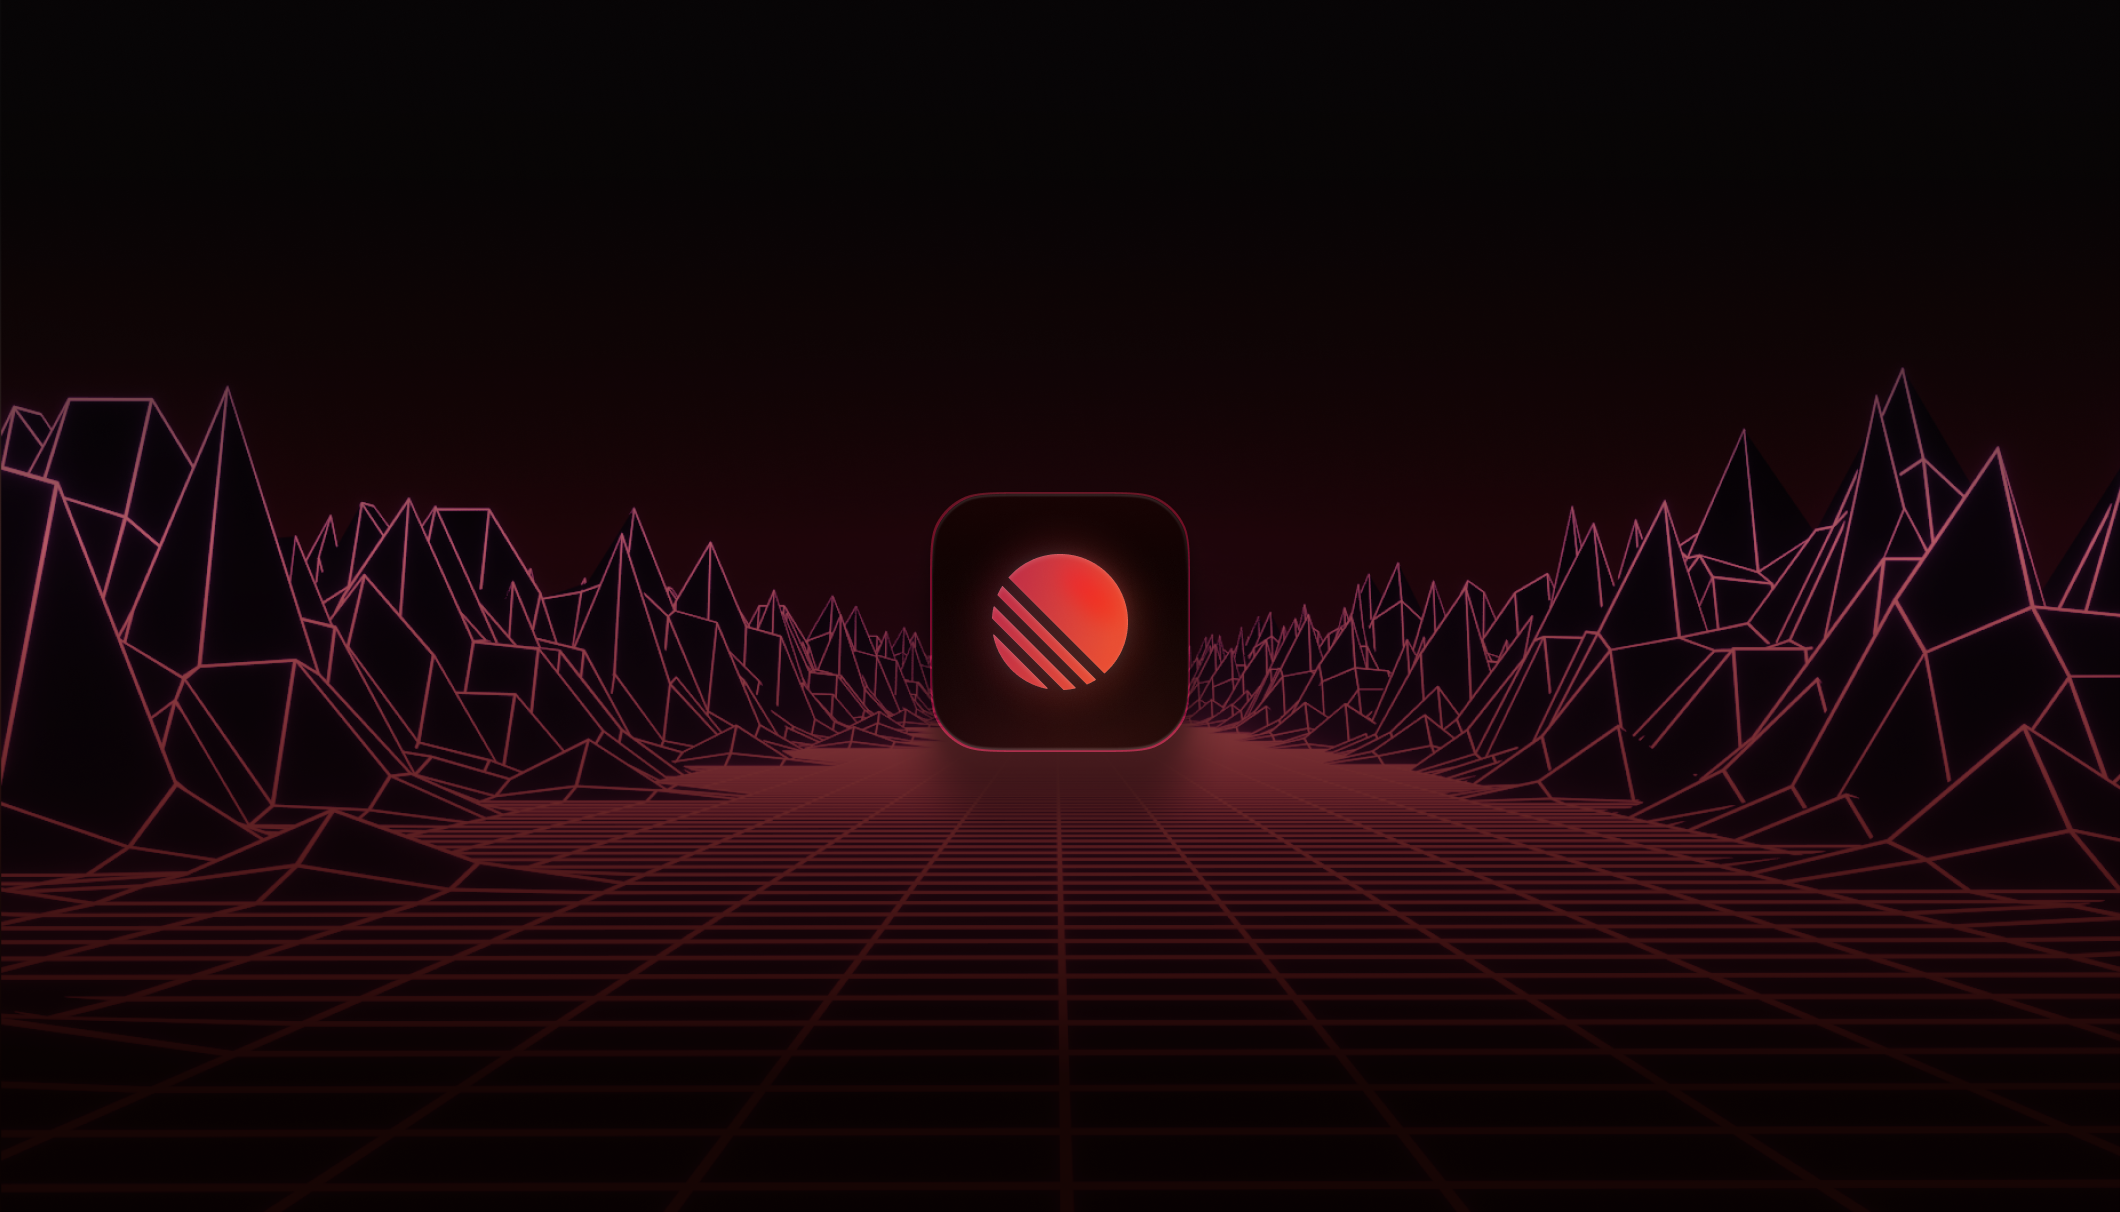 Linear logo in orange and red gradient among geometric mountains 